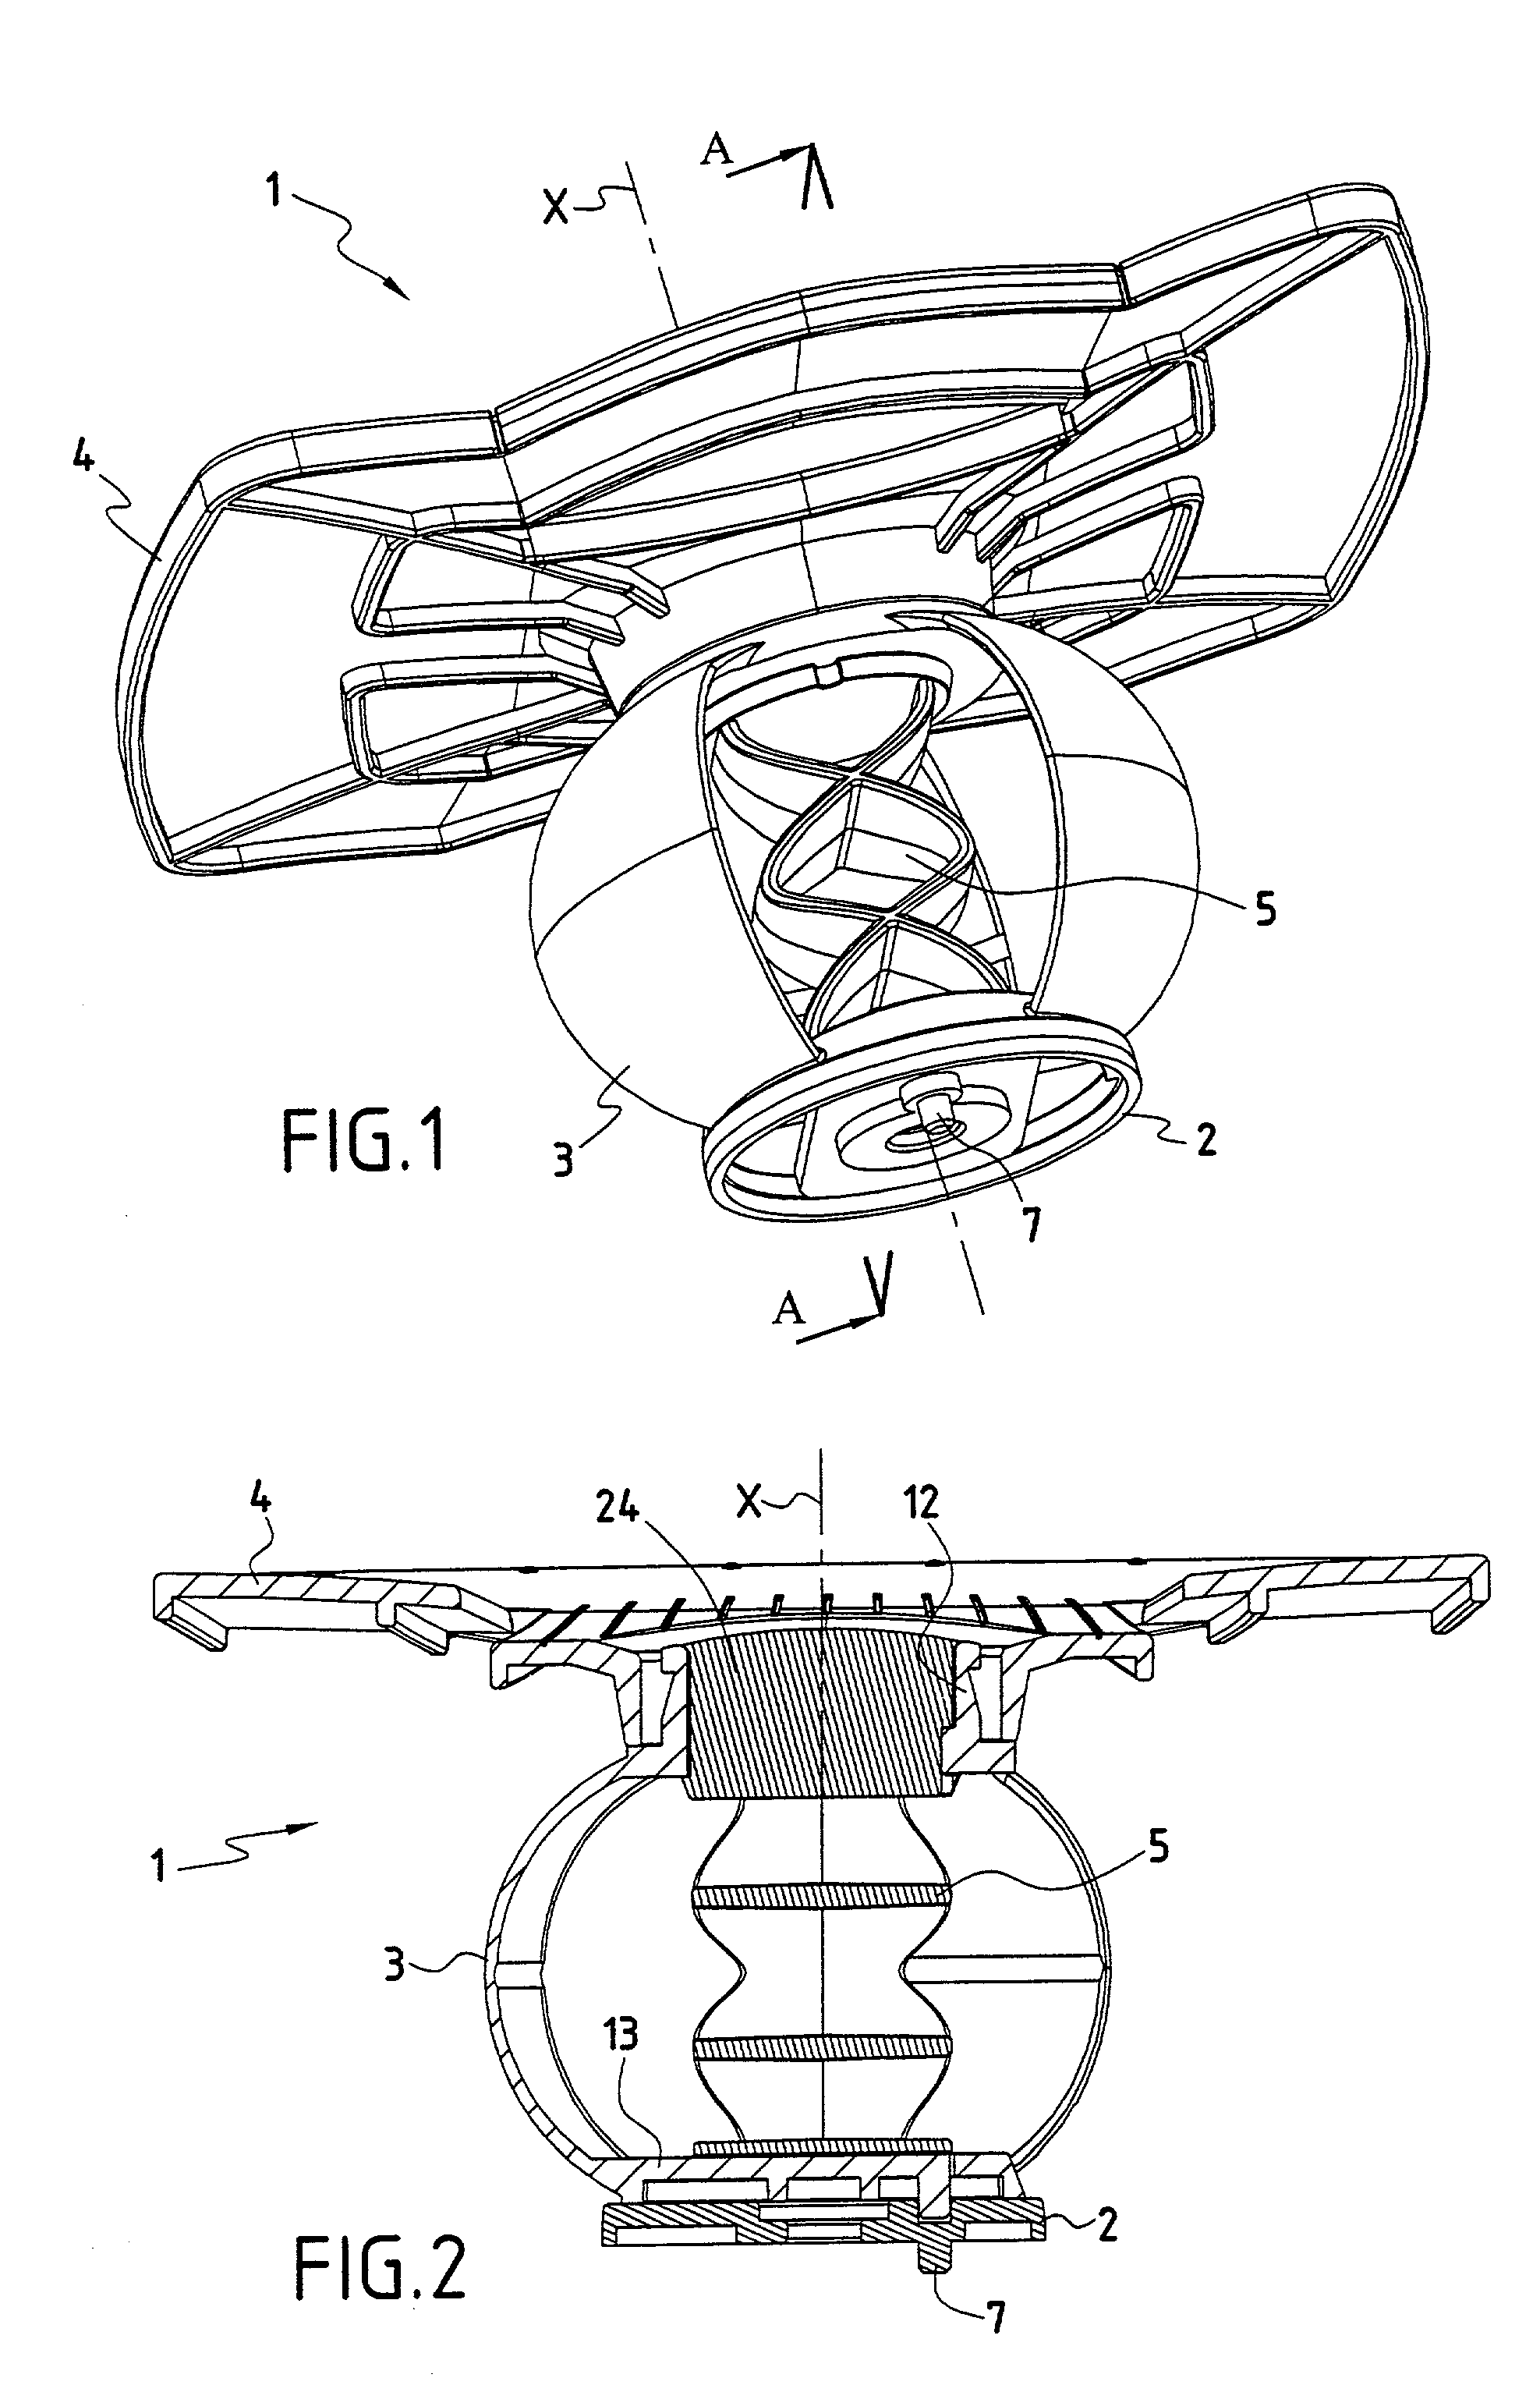 Suspension device for a bed or seat base of the multielement type